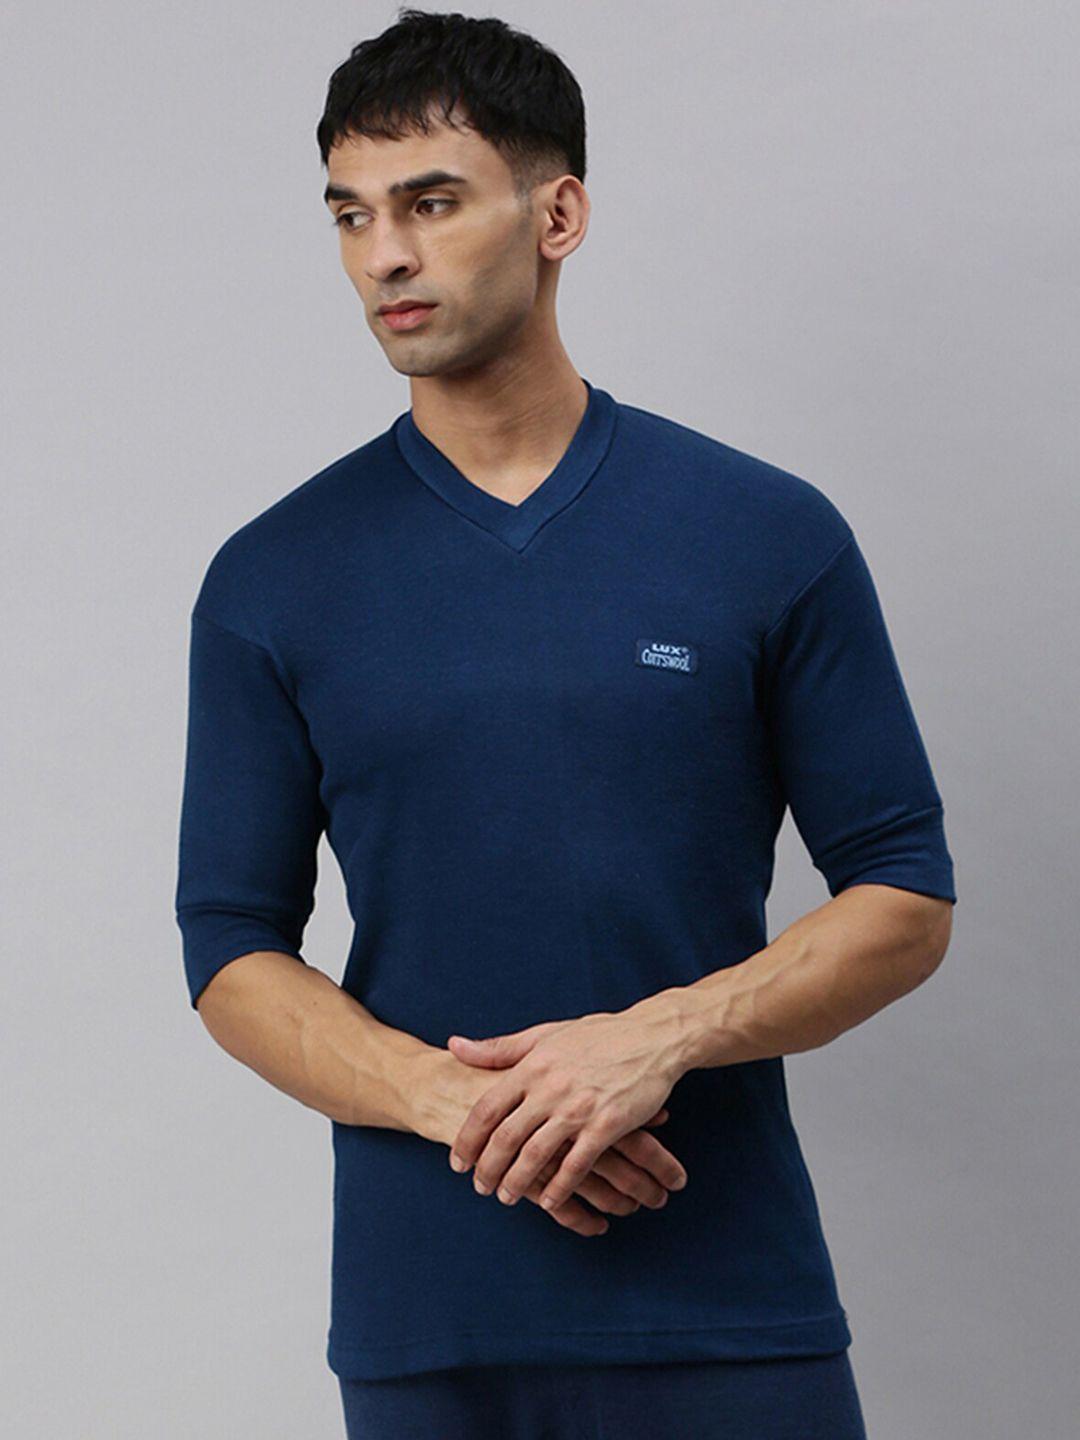 lux-cottswool-v-neck-wool-thermal-tops